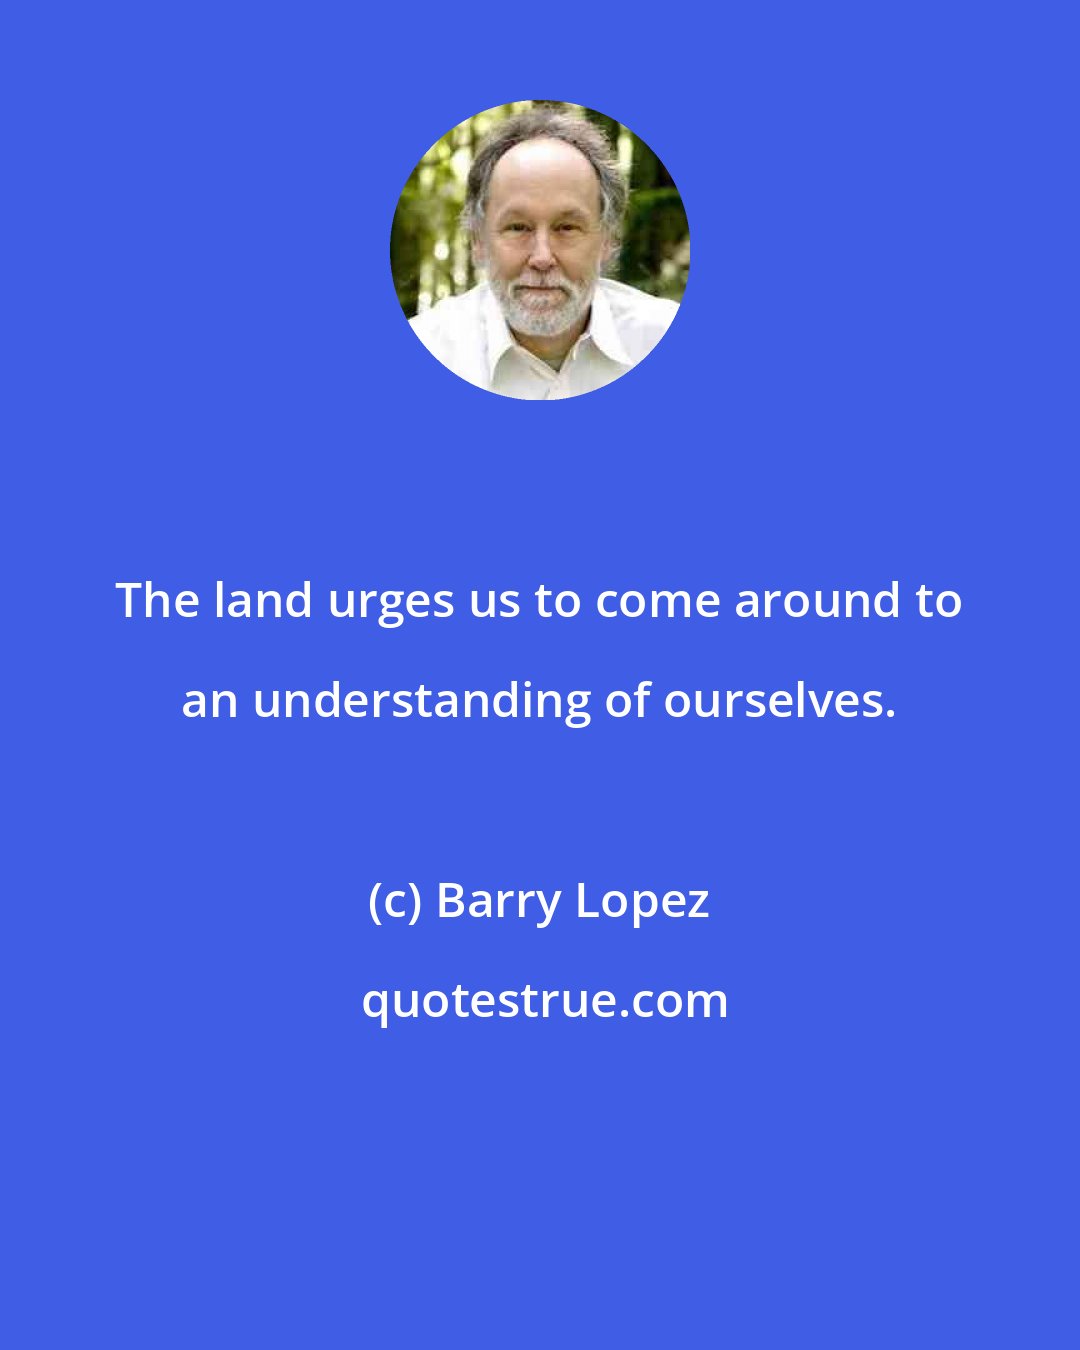 Barry Lopez: The land urges us to come around to an understanding of ourselves.